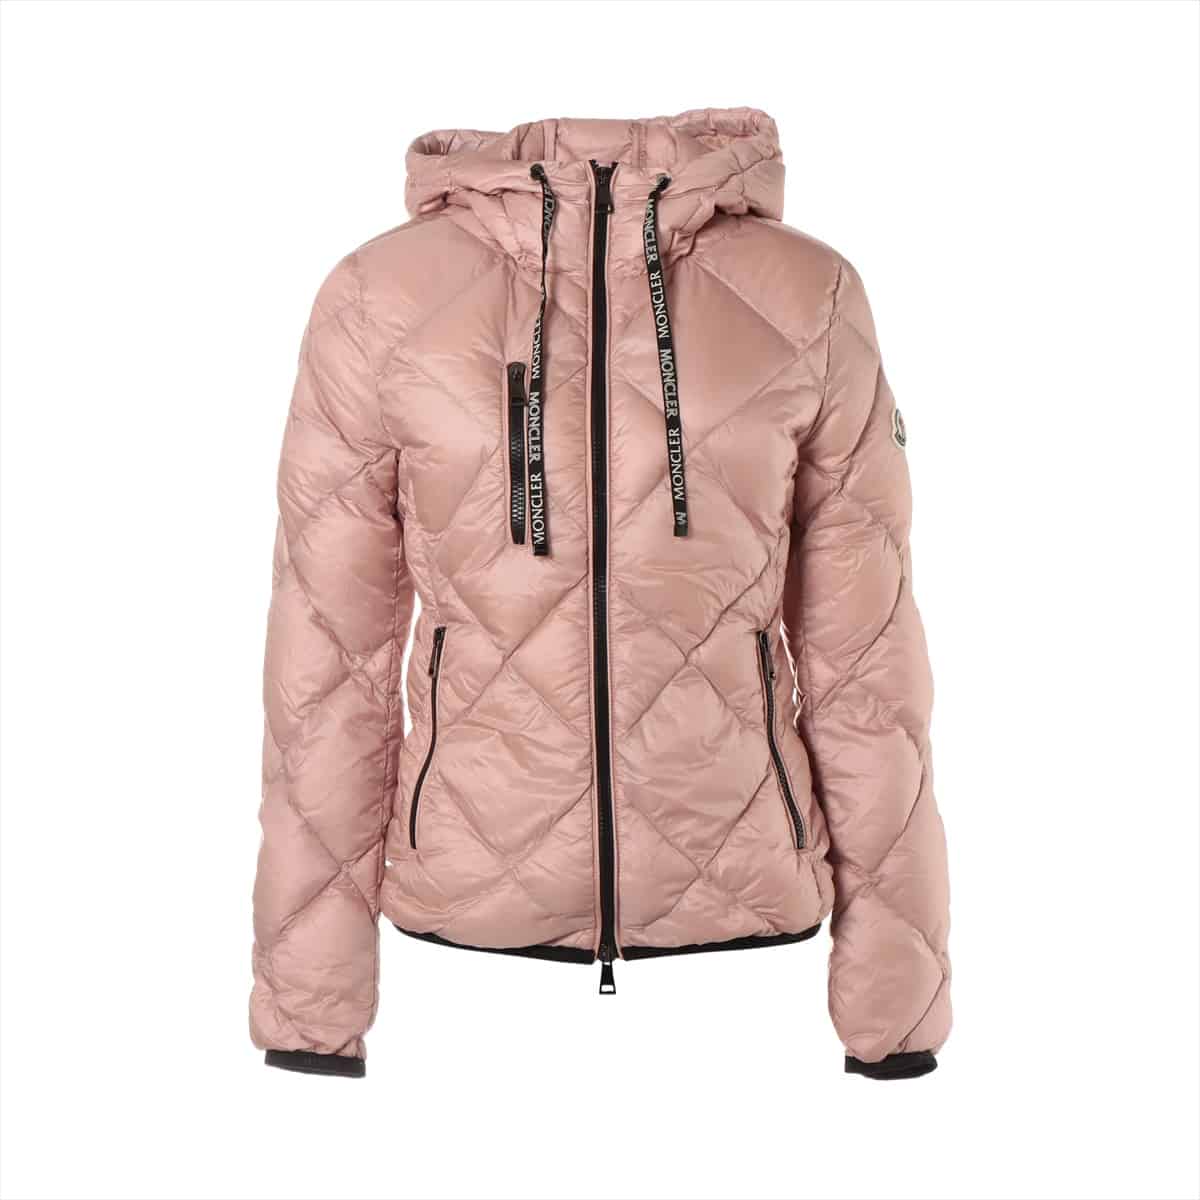 moncler OULX ピンク www.krzysztofbialy.com